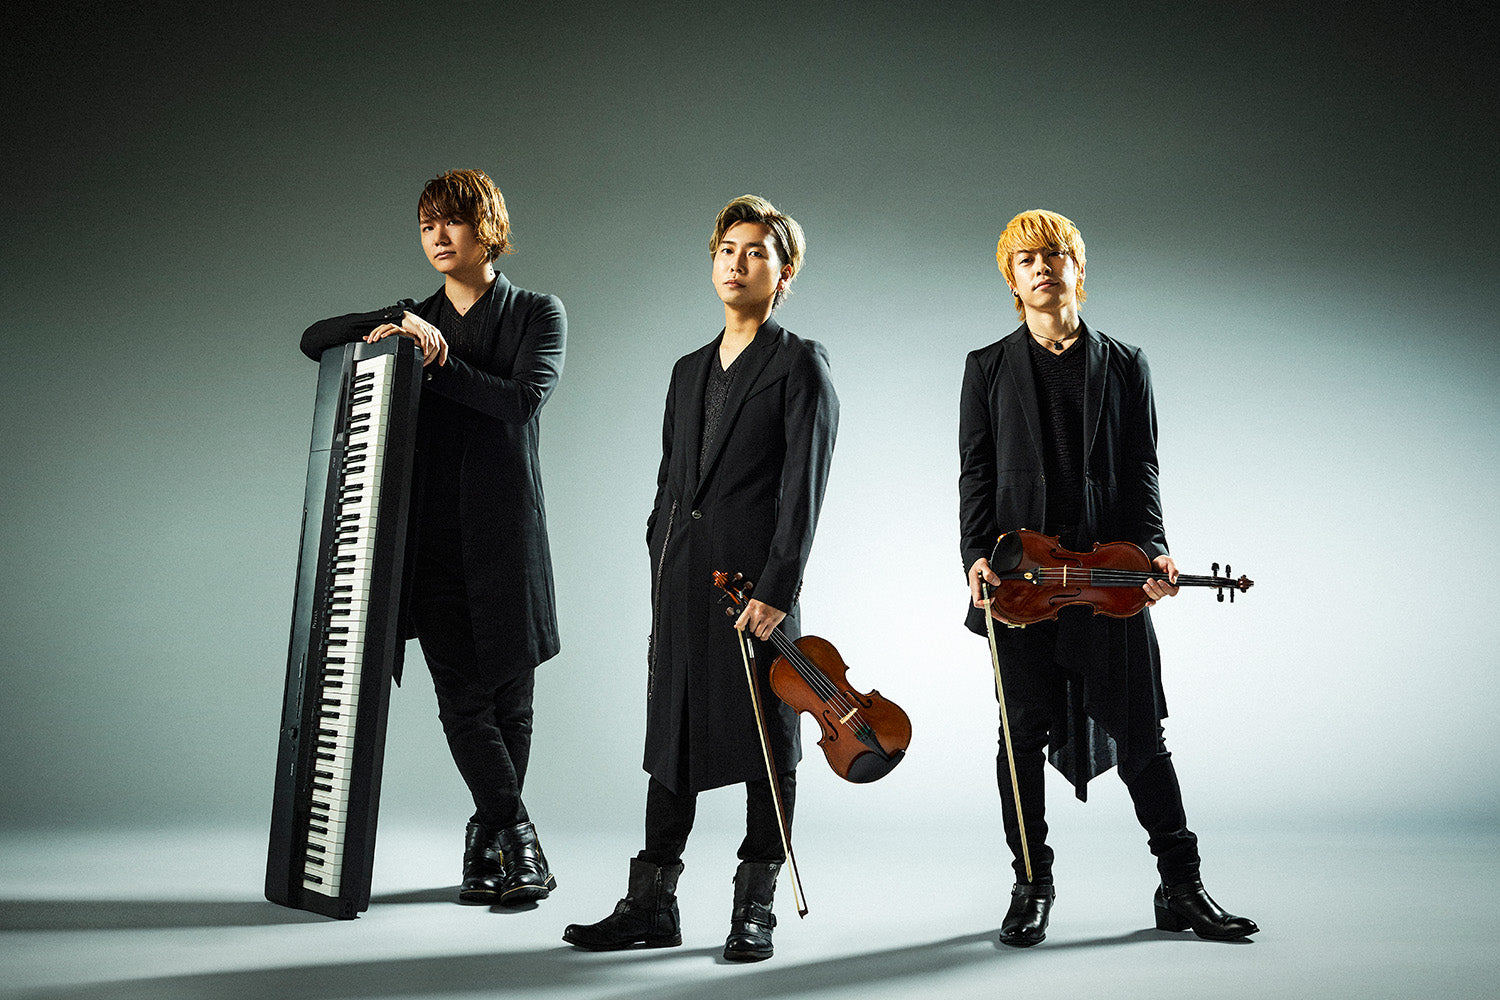 sources band from Japan with violins and pianist